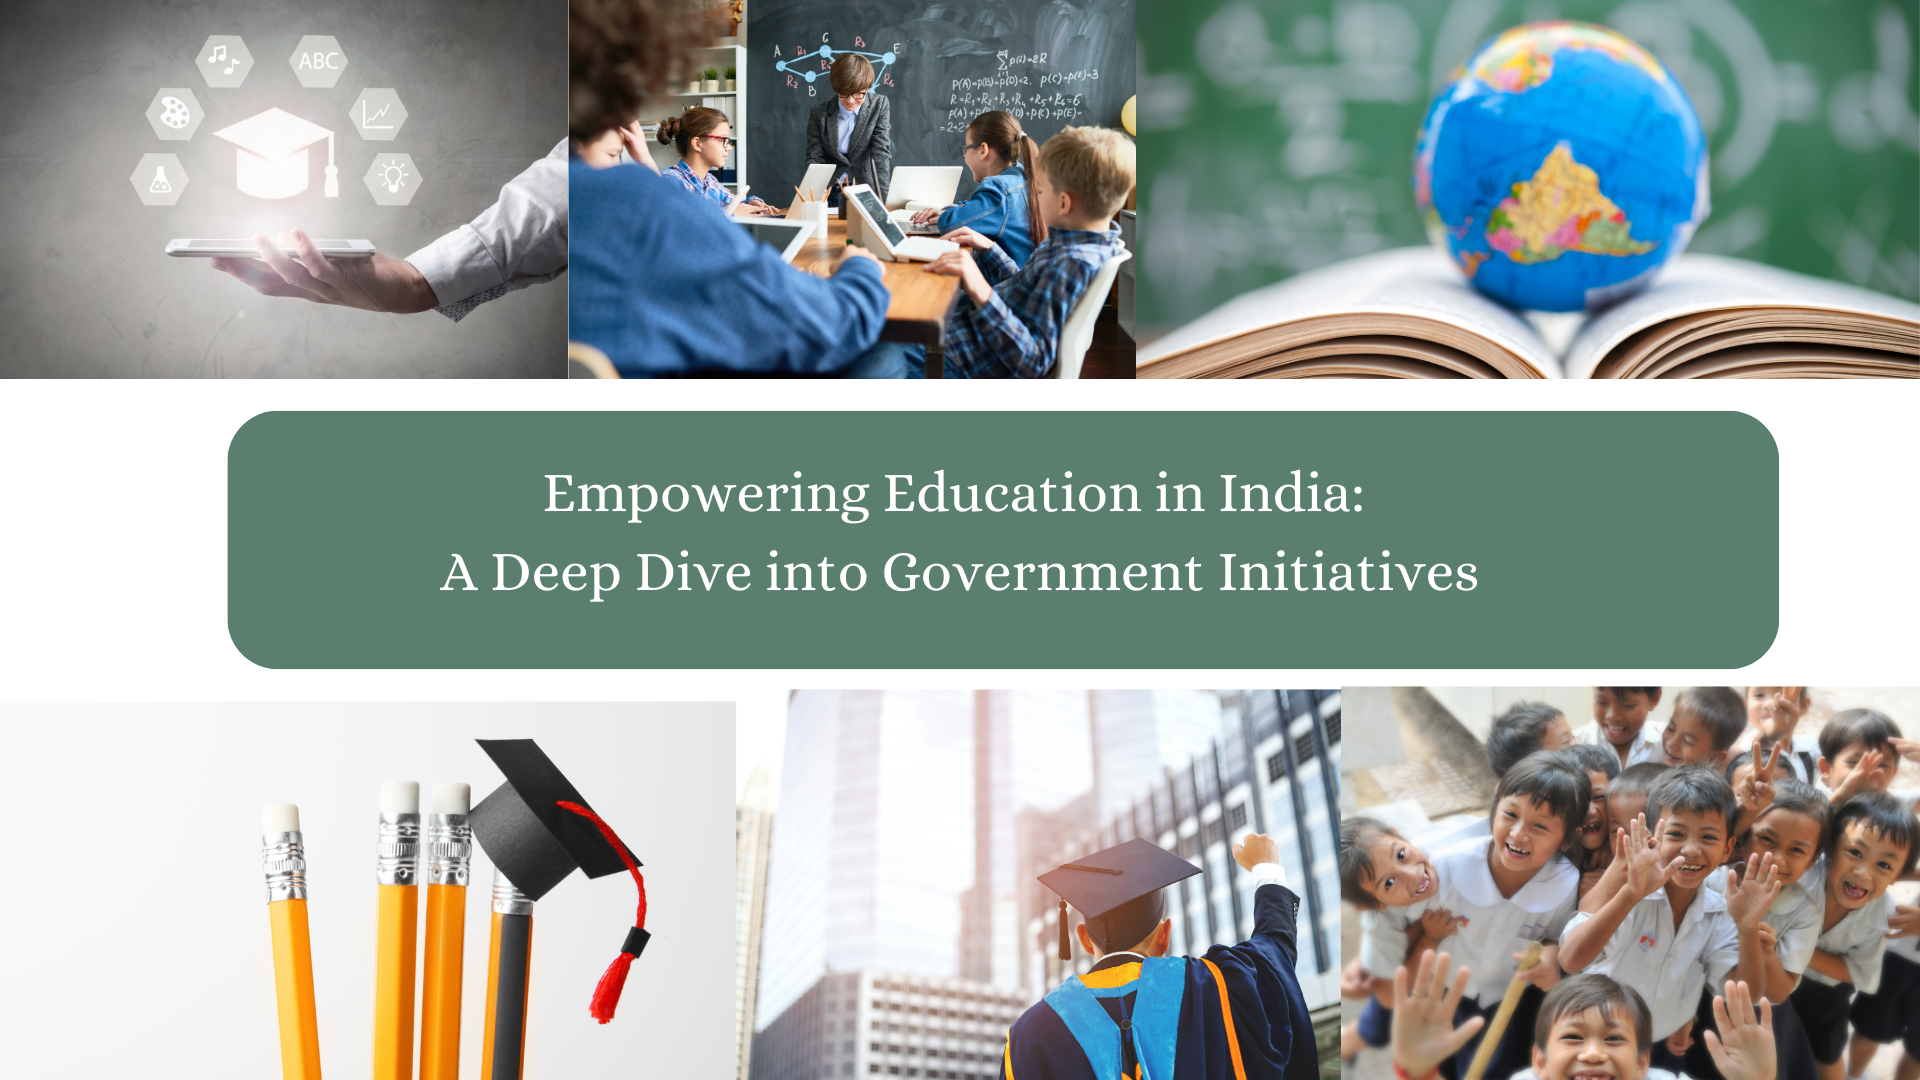 Empowering Education in India: A Deep Dive into Government Initiatives